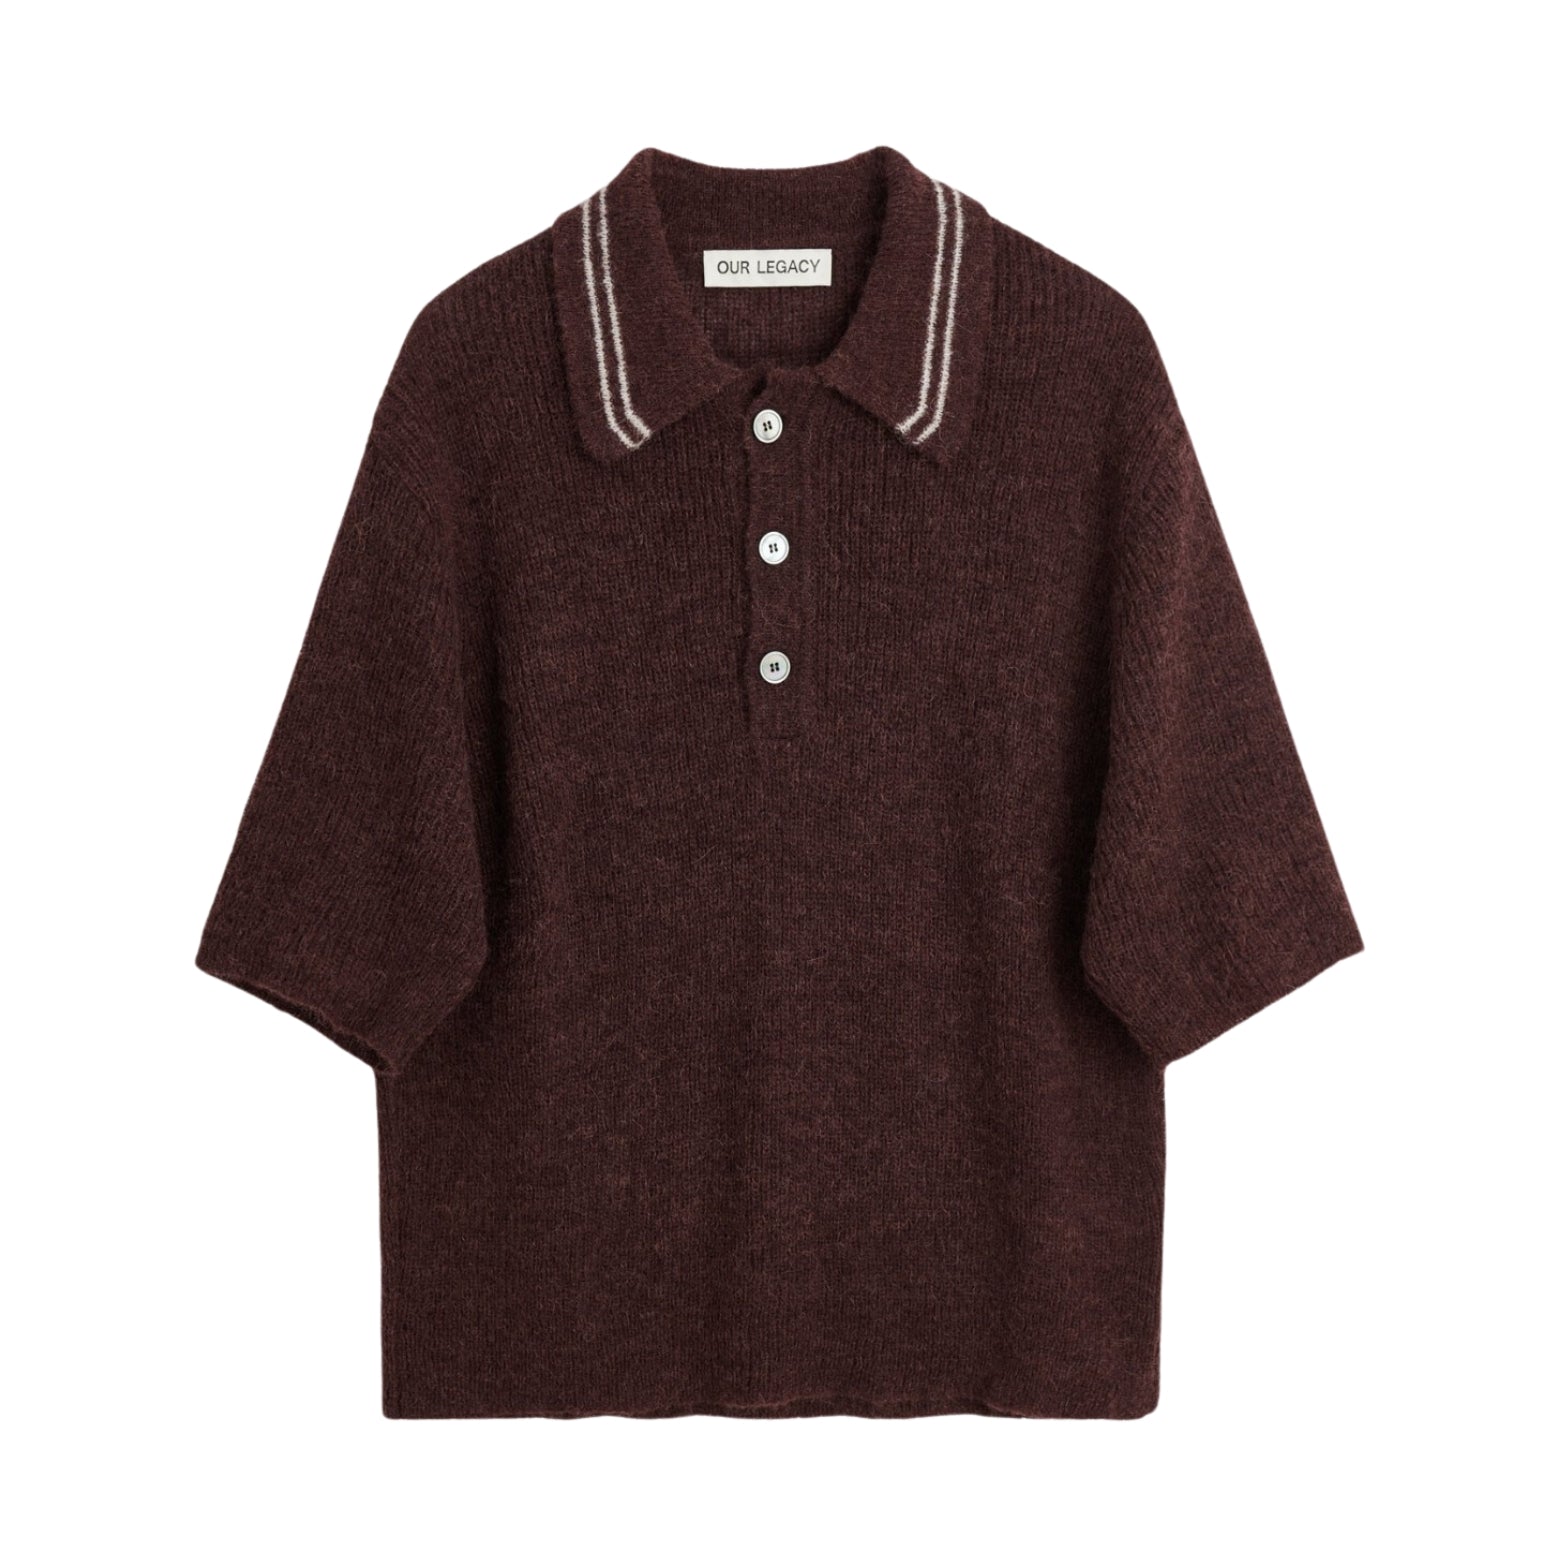 OUR LEGACY TRADITIONAL SHORTSLEEVE KNIT POLO SWEATER PURPLE